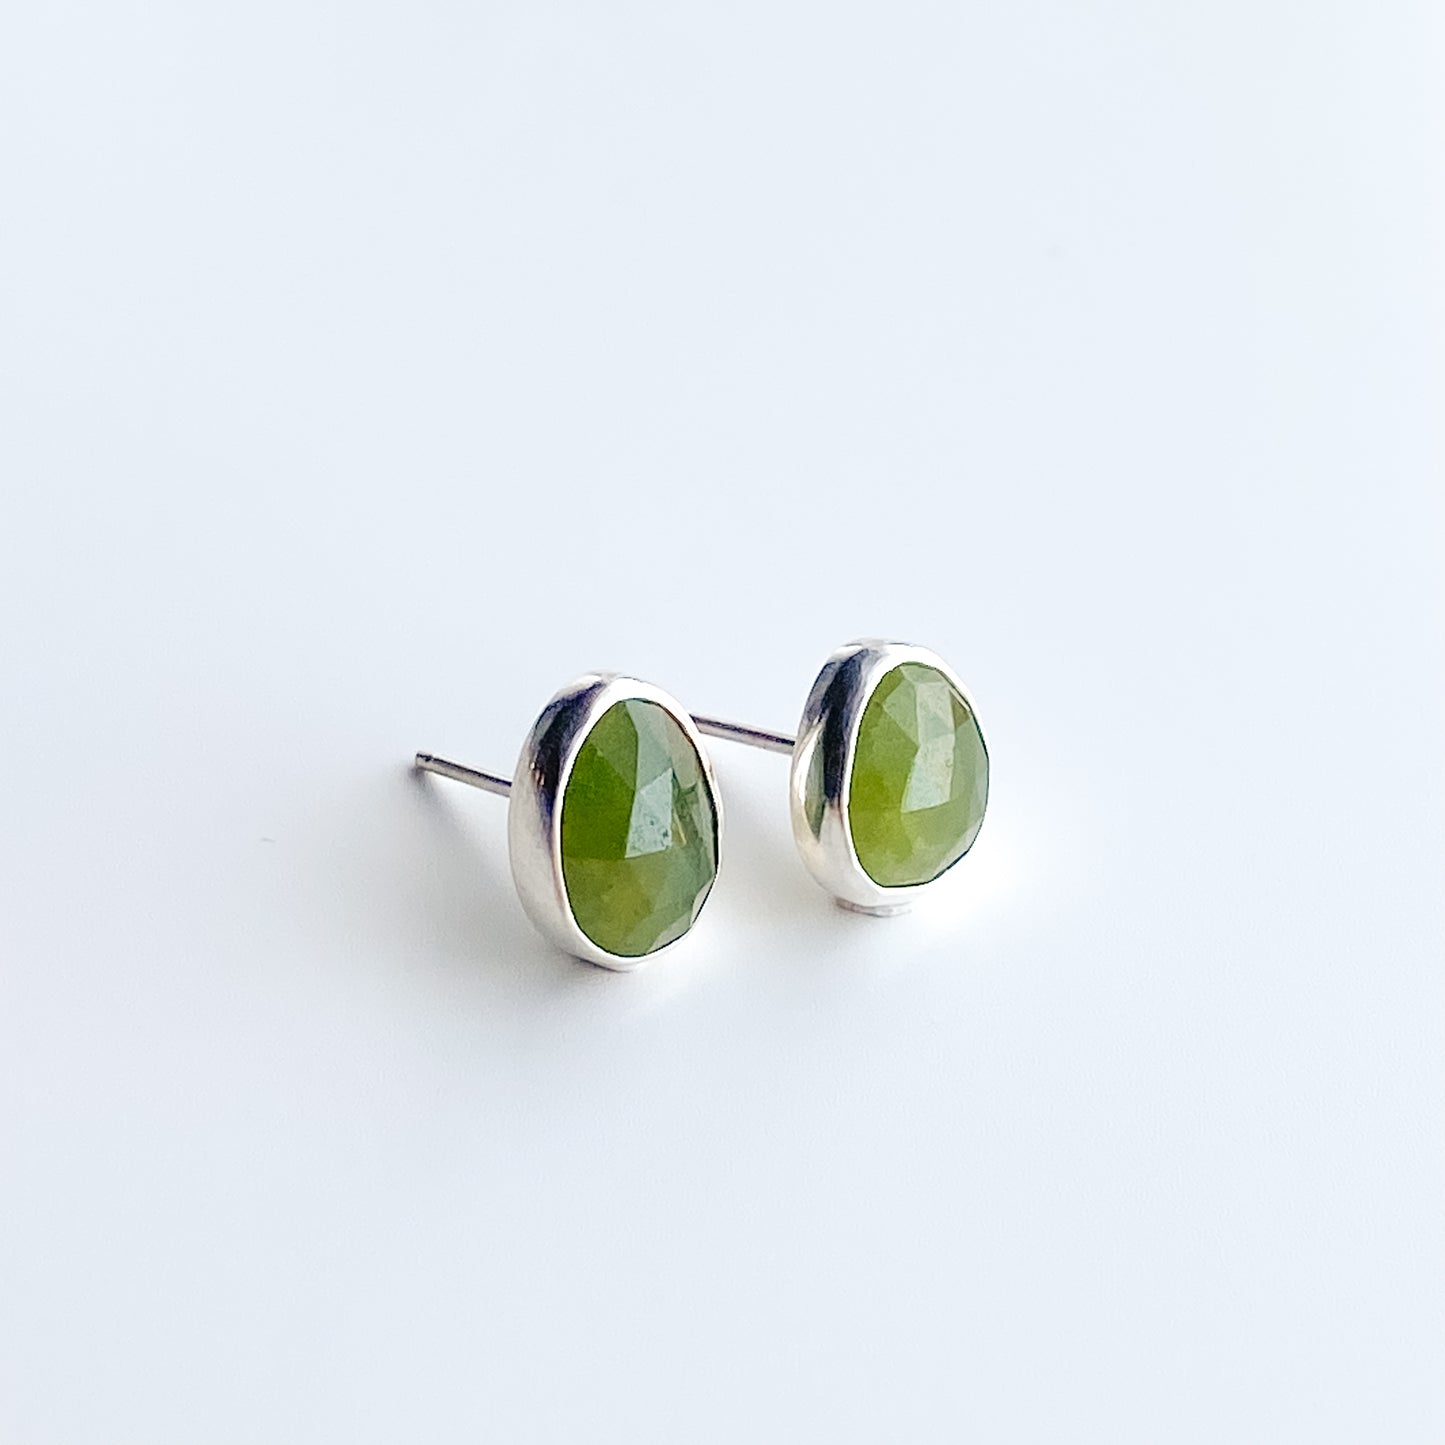 Imperfectly Paired Vesuvianite Stud Earrings